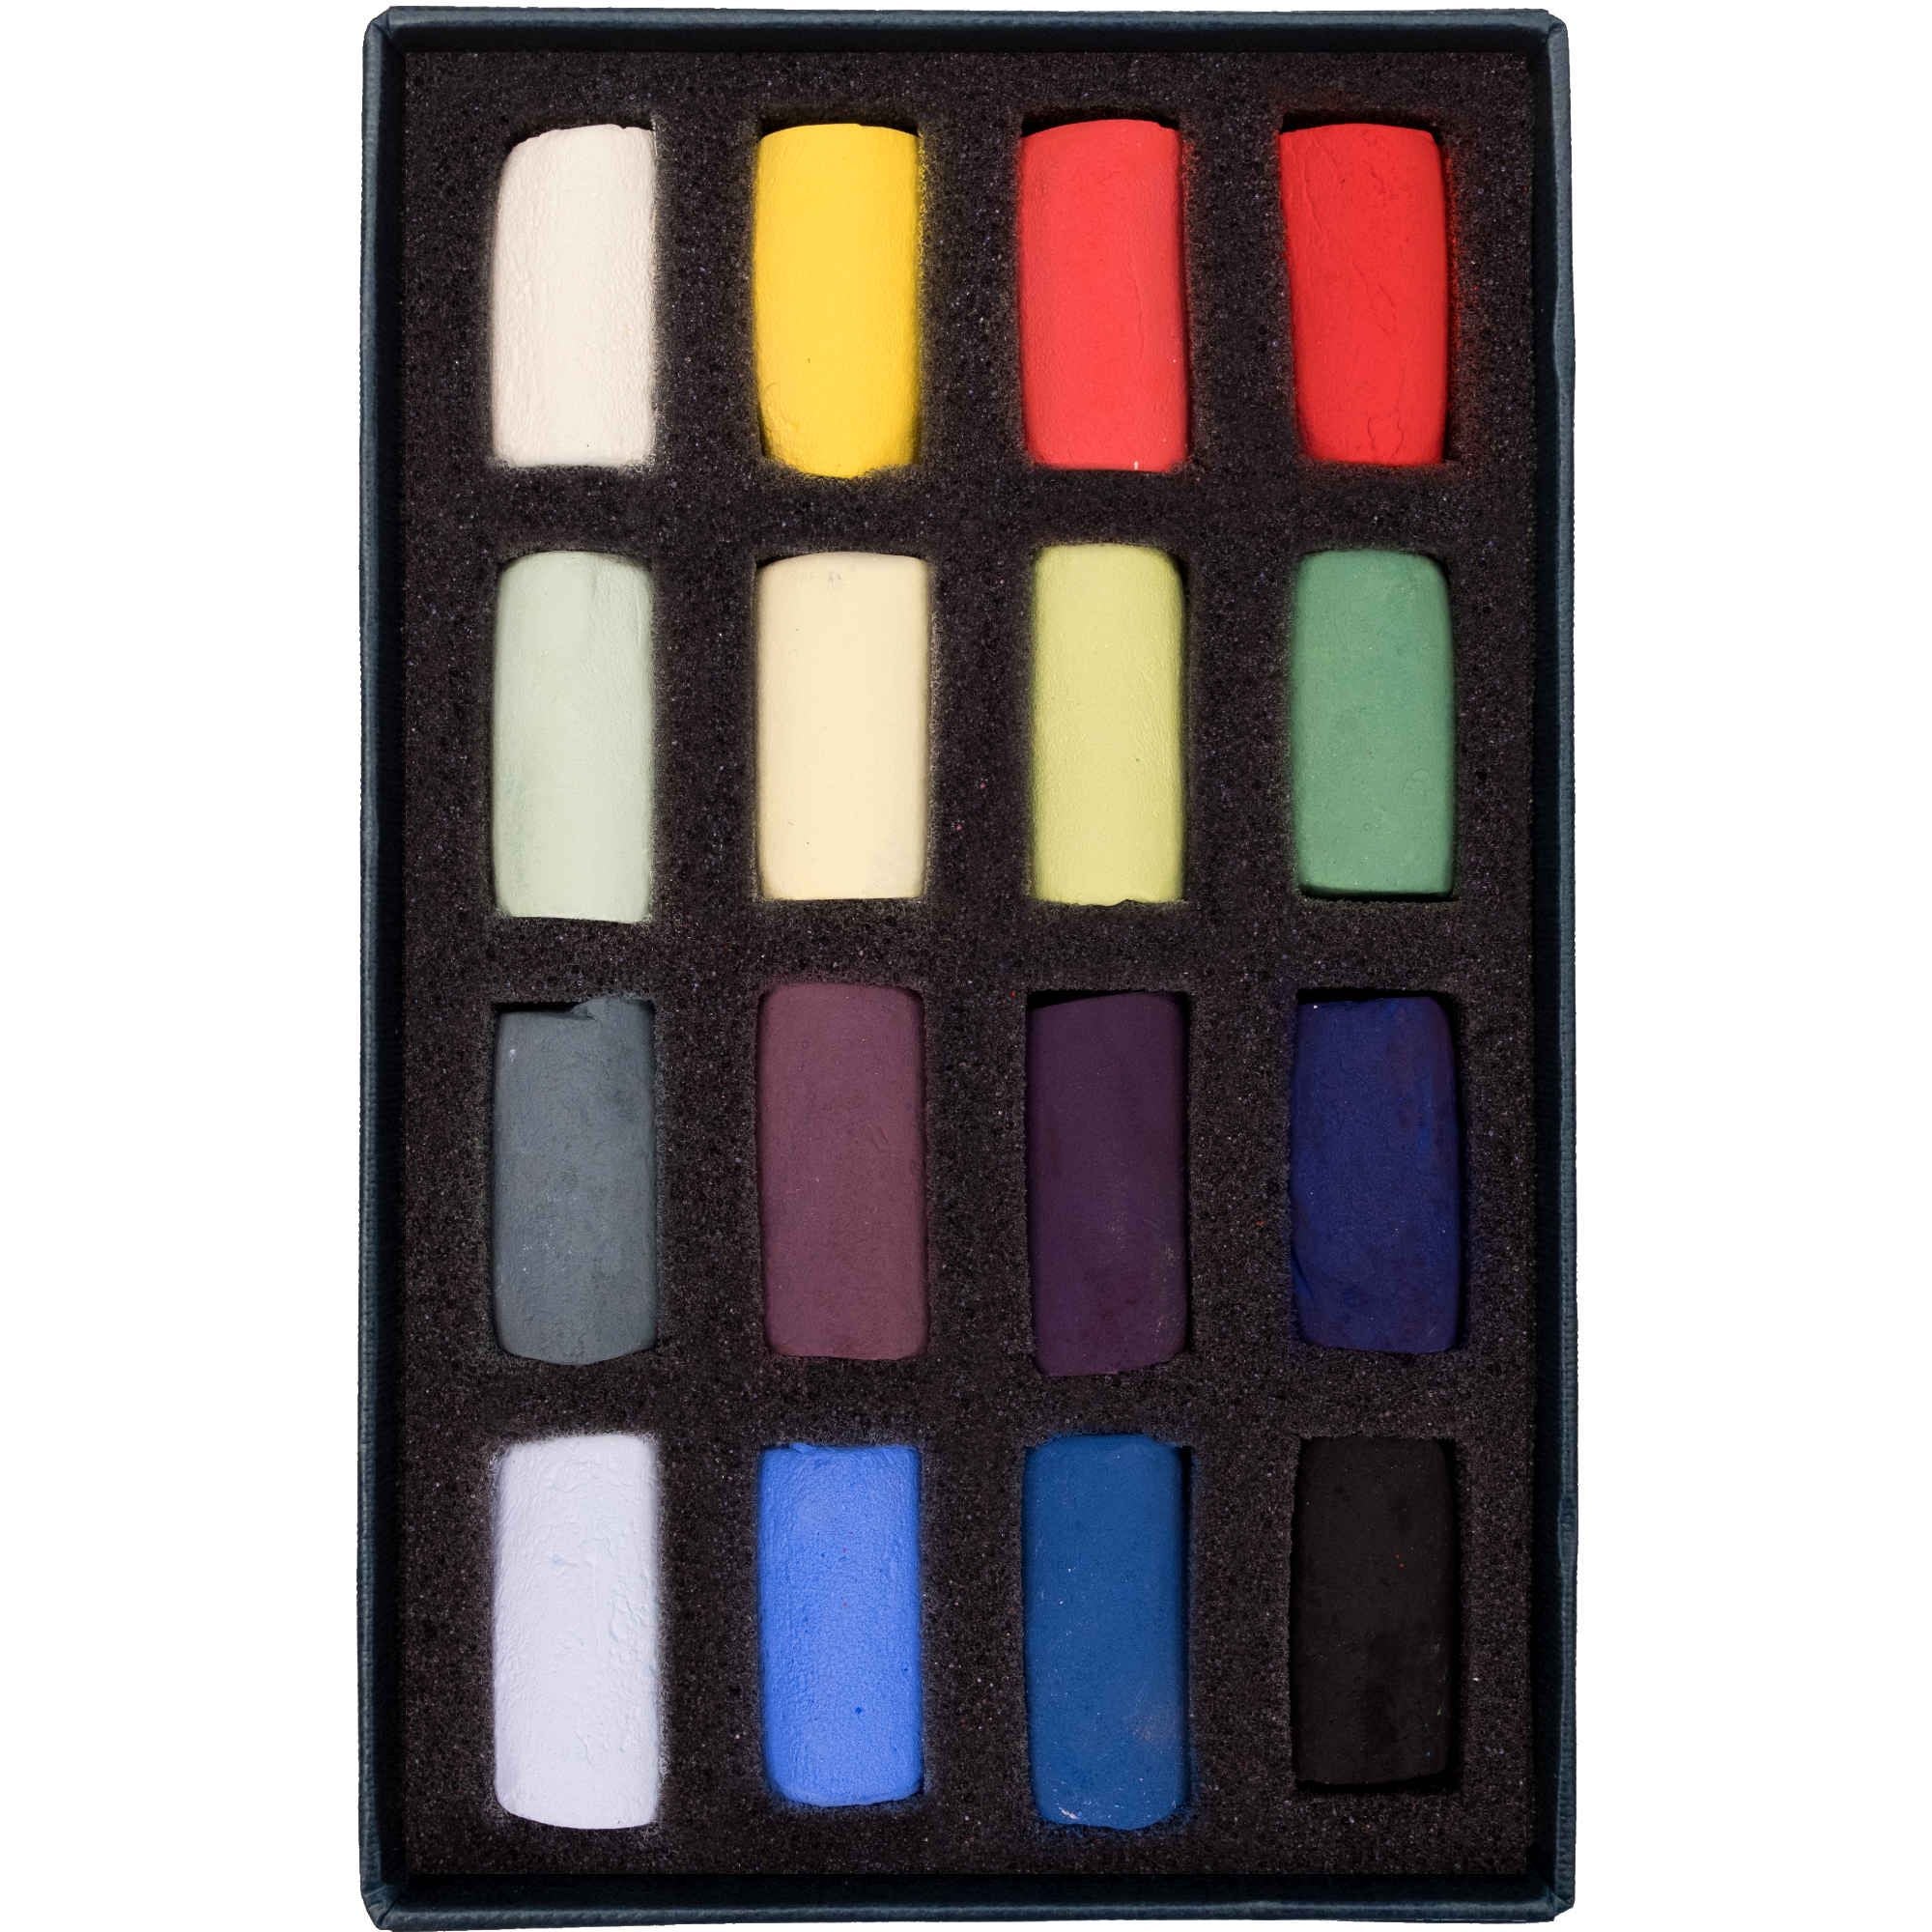 Unison soft pastel classic half stick starter set of 16 individual colours. This set contains a great selection of colour choices to introduce you to the Unison range. 